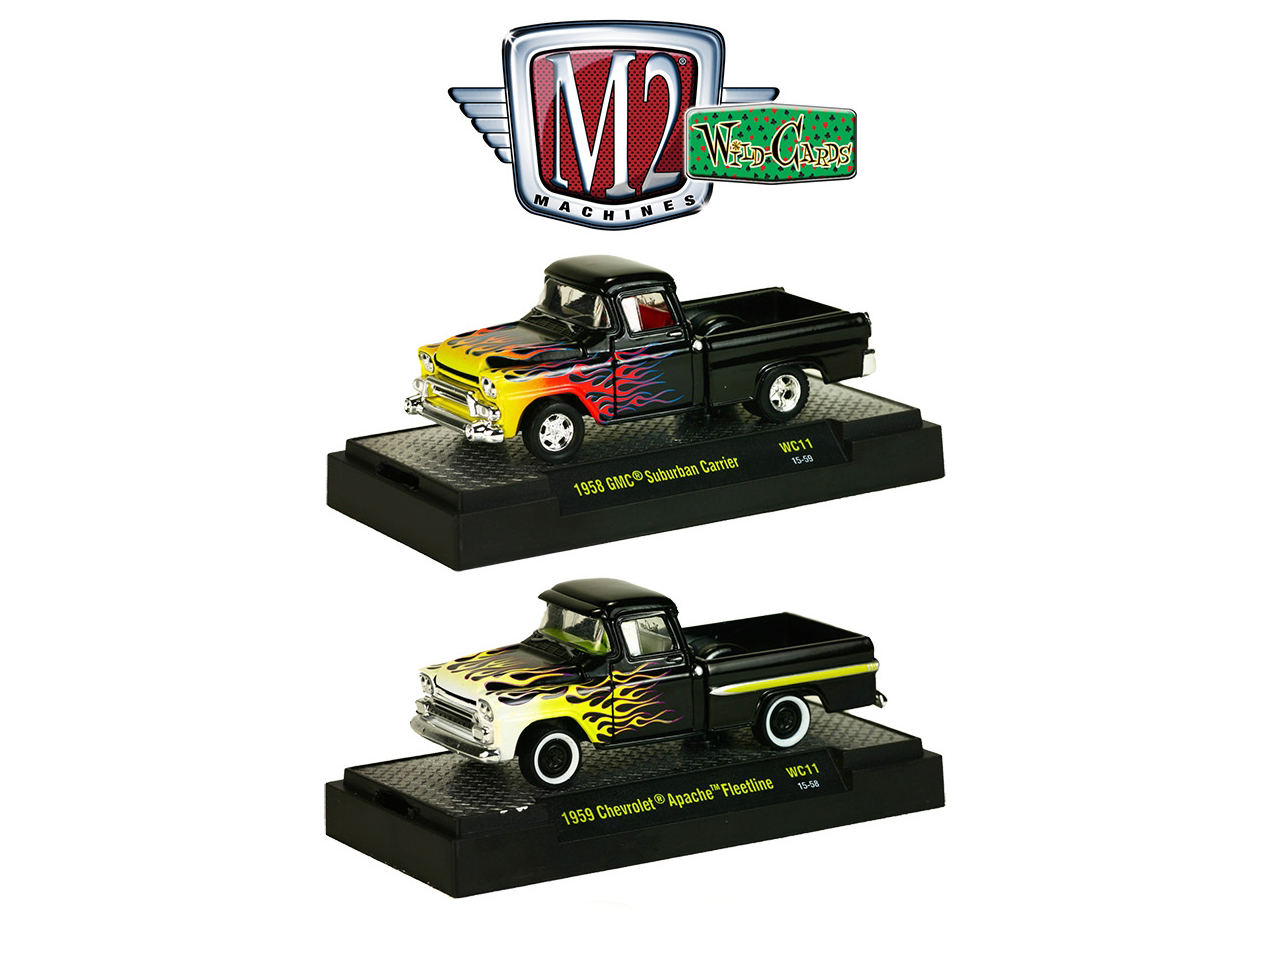 Wild Cards 1958 Gmc Suburban Carrier Pickup Truck And 1959 Chevrolet Apache Fleetline Pickup Truck Set Of 2 With Cases 1/64 Diecast Models By M2 Mach